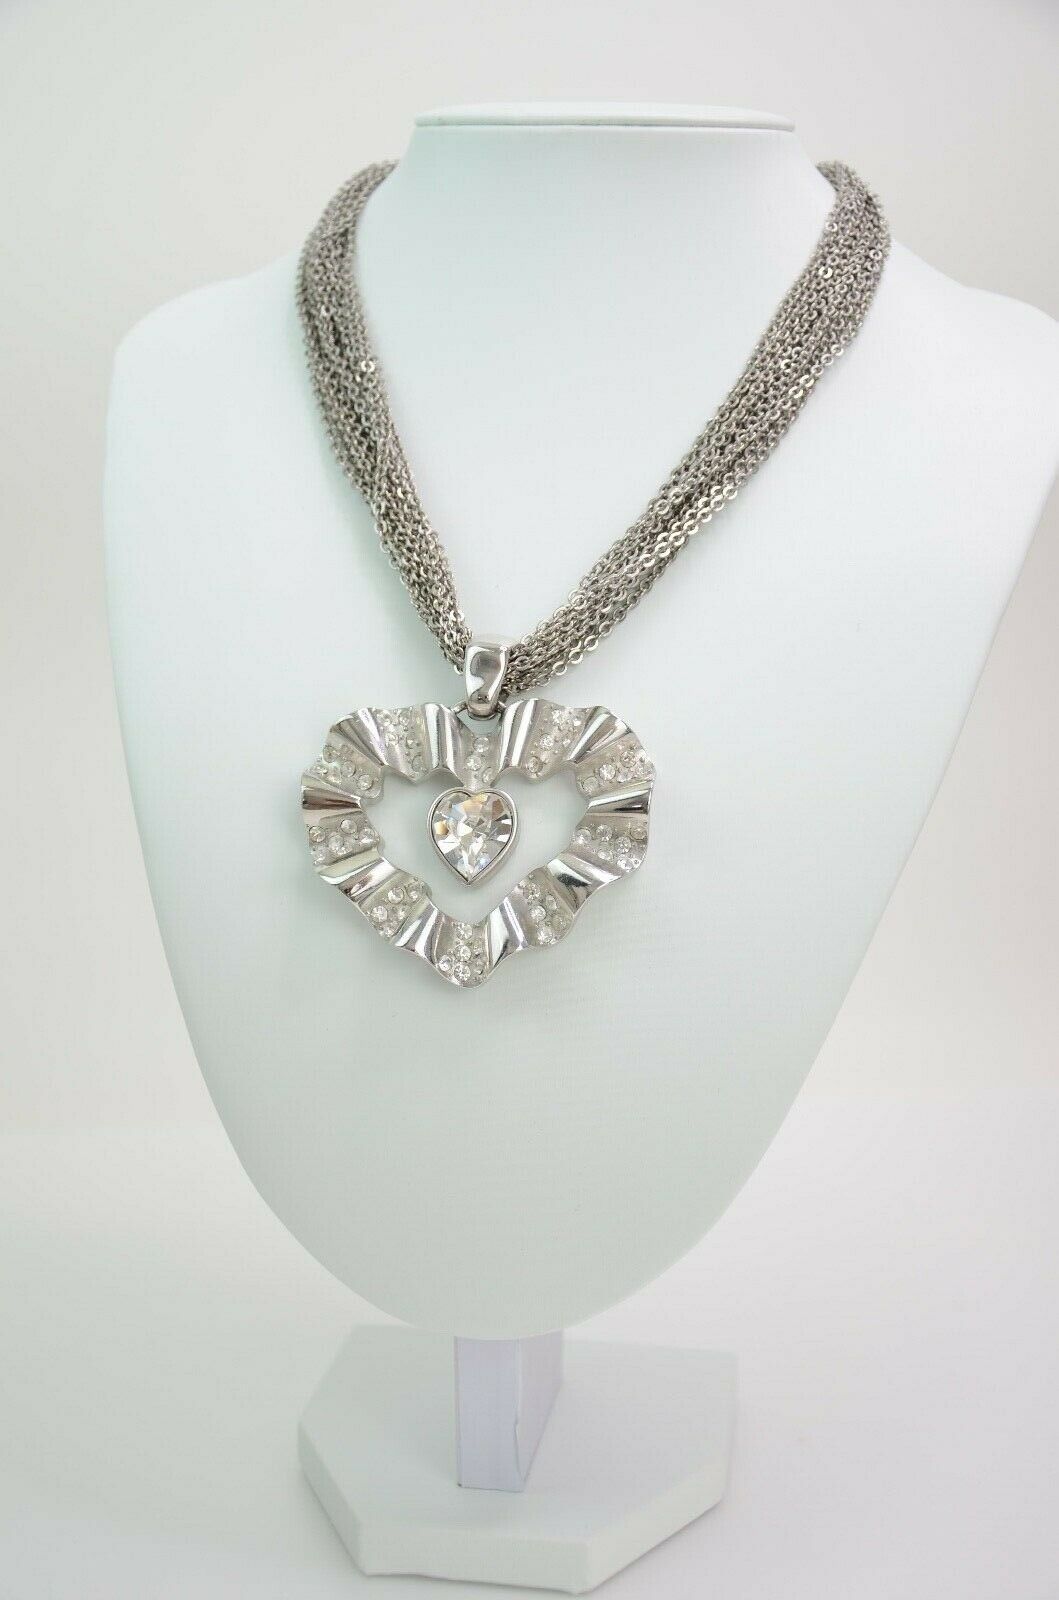 Givenchy Extra Large Heart Necklace Silver Tone Crystals Gorgeous